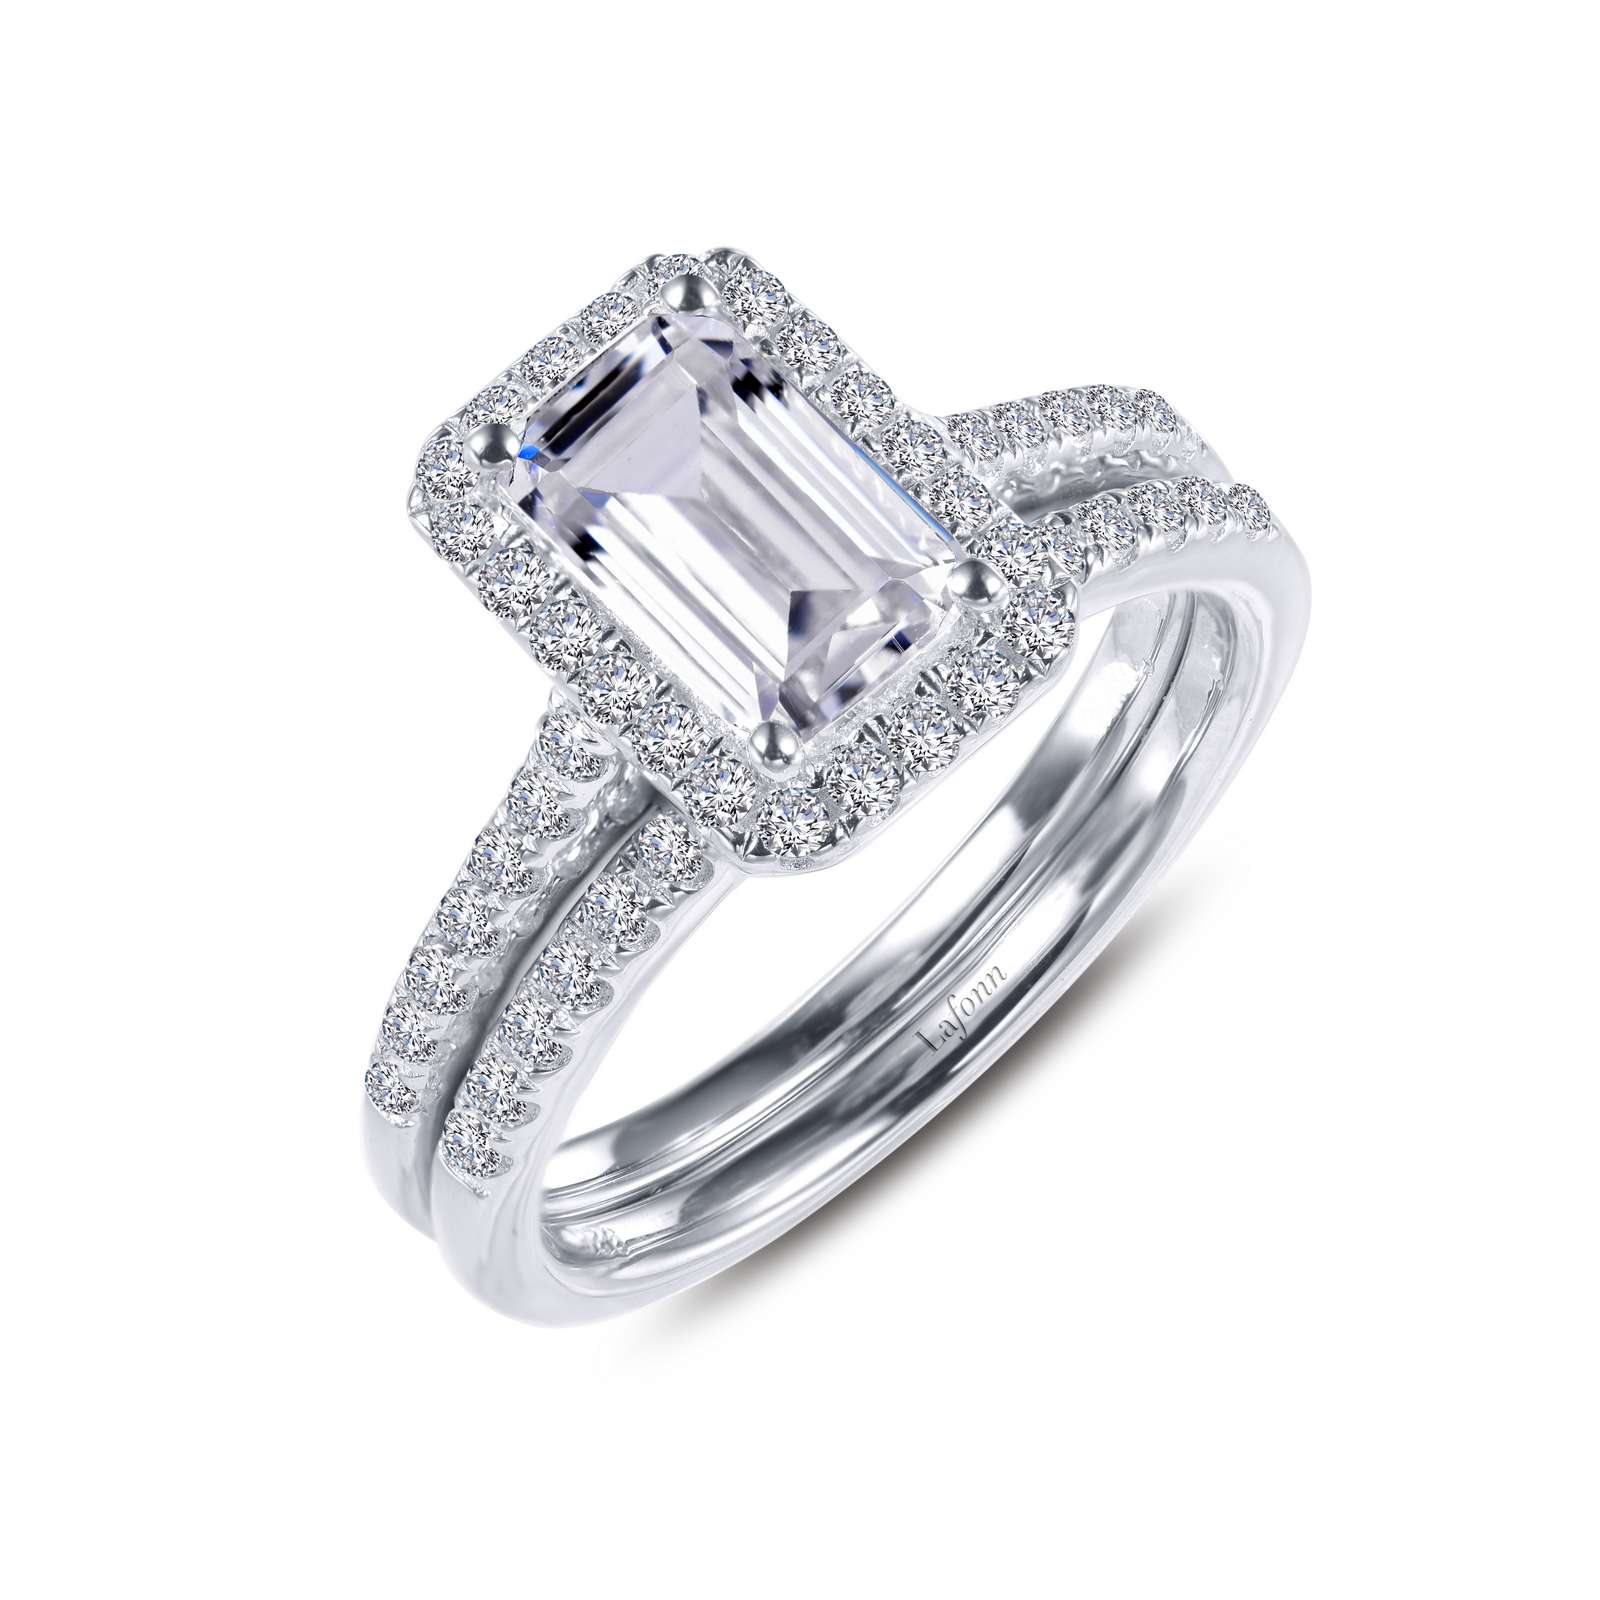 Emerald-Cut Halo Wedding Set Griner Jewelry Co. Moultrie, GA